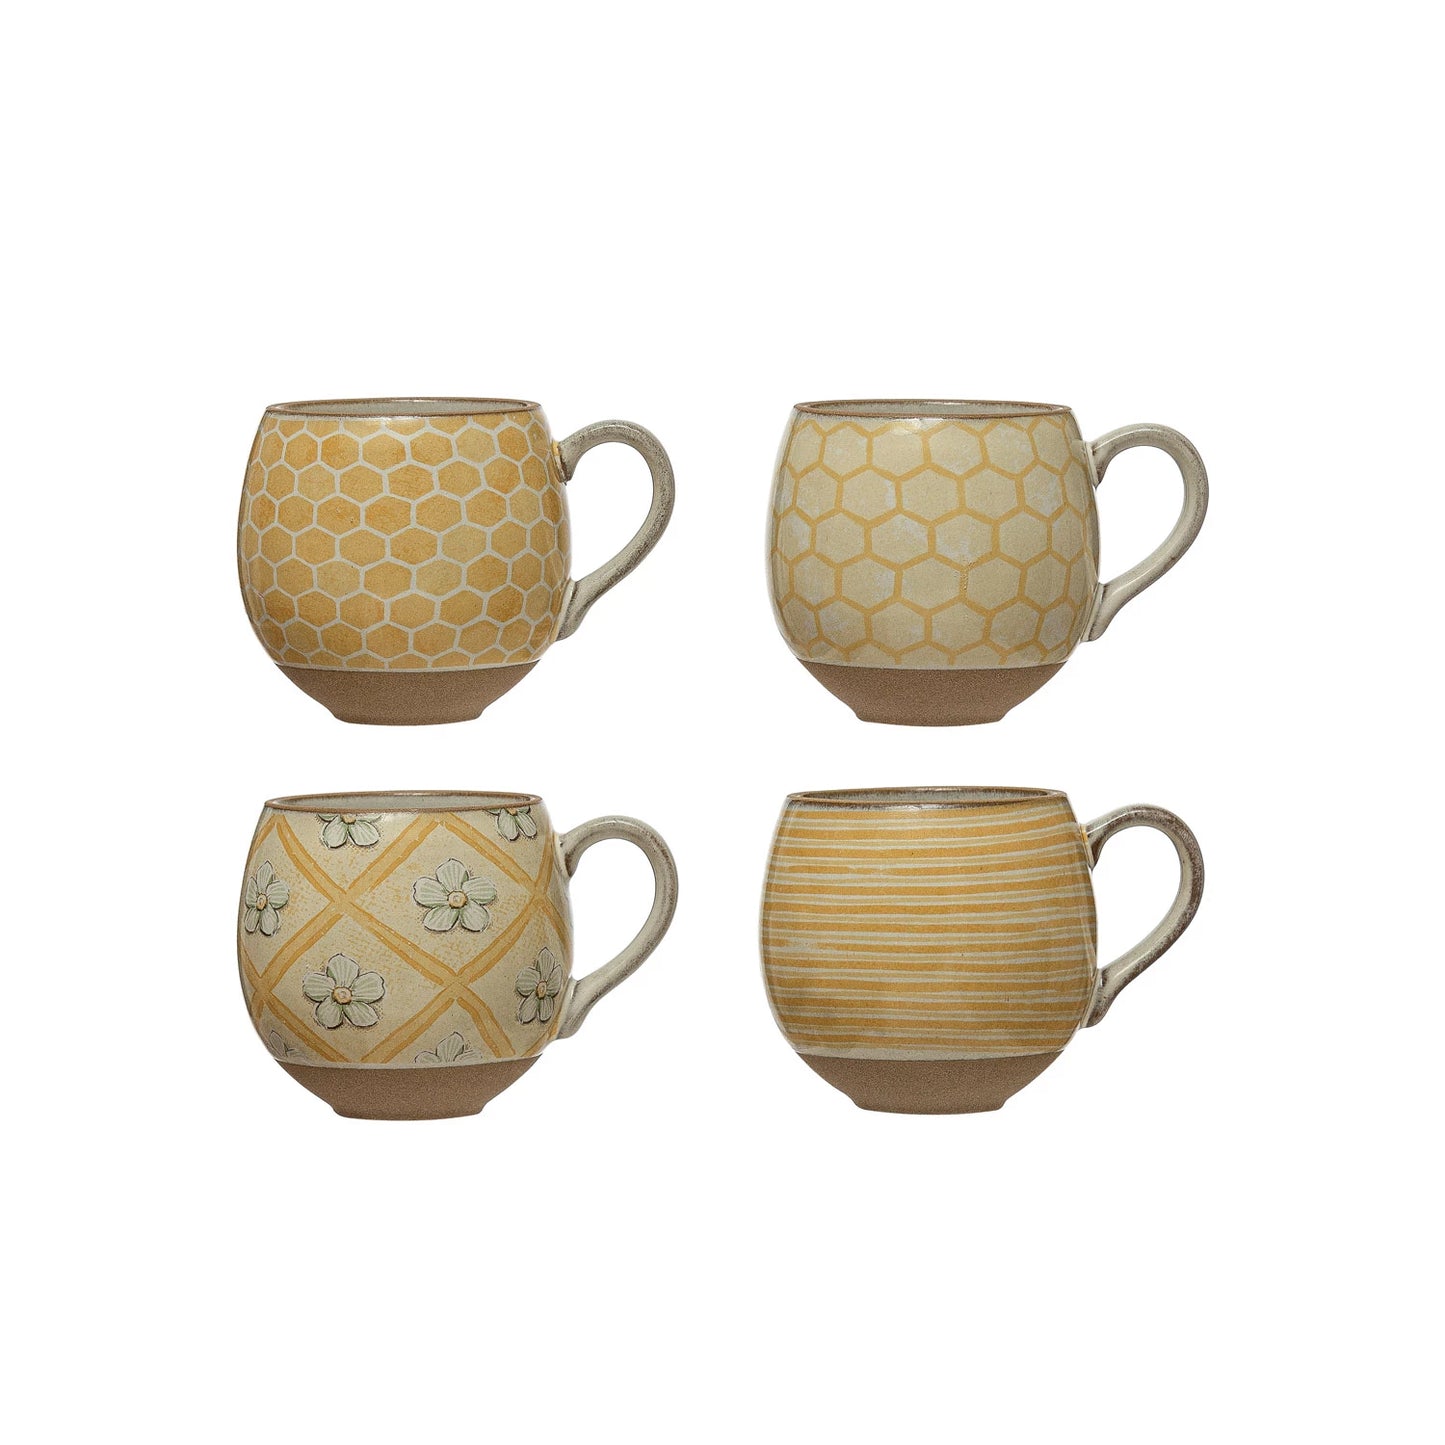 Rustic Country Patterned Mugs